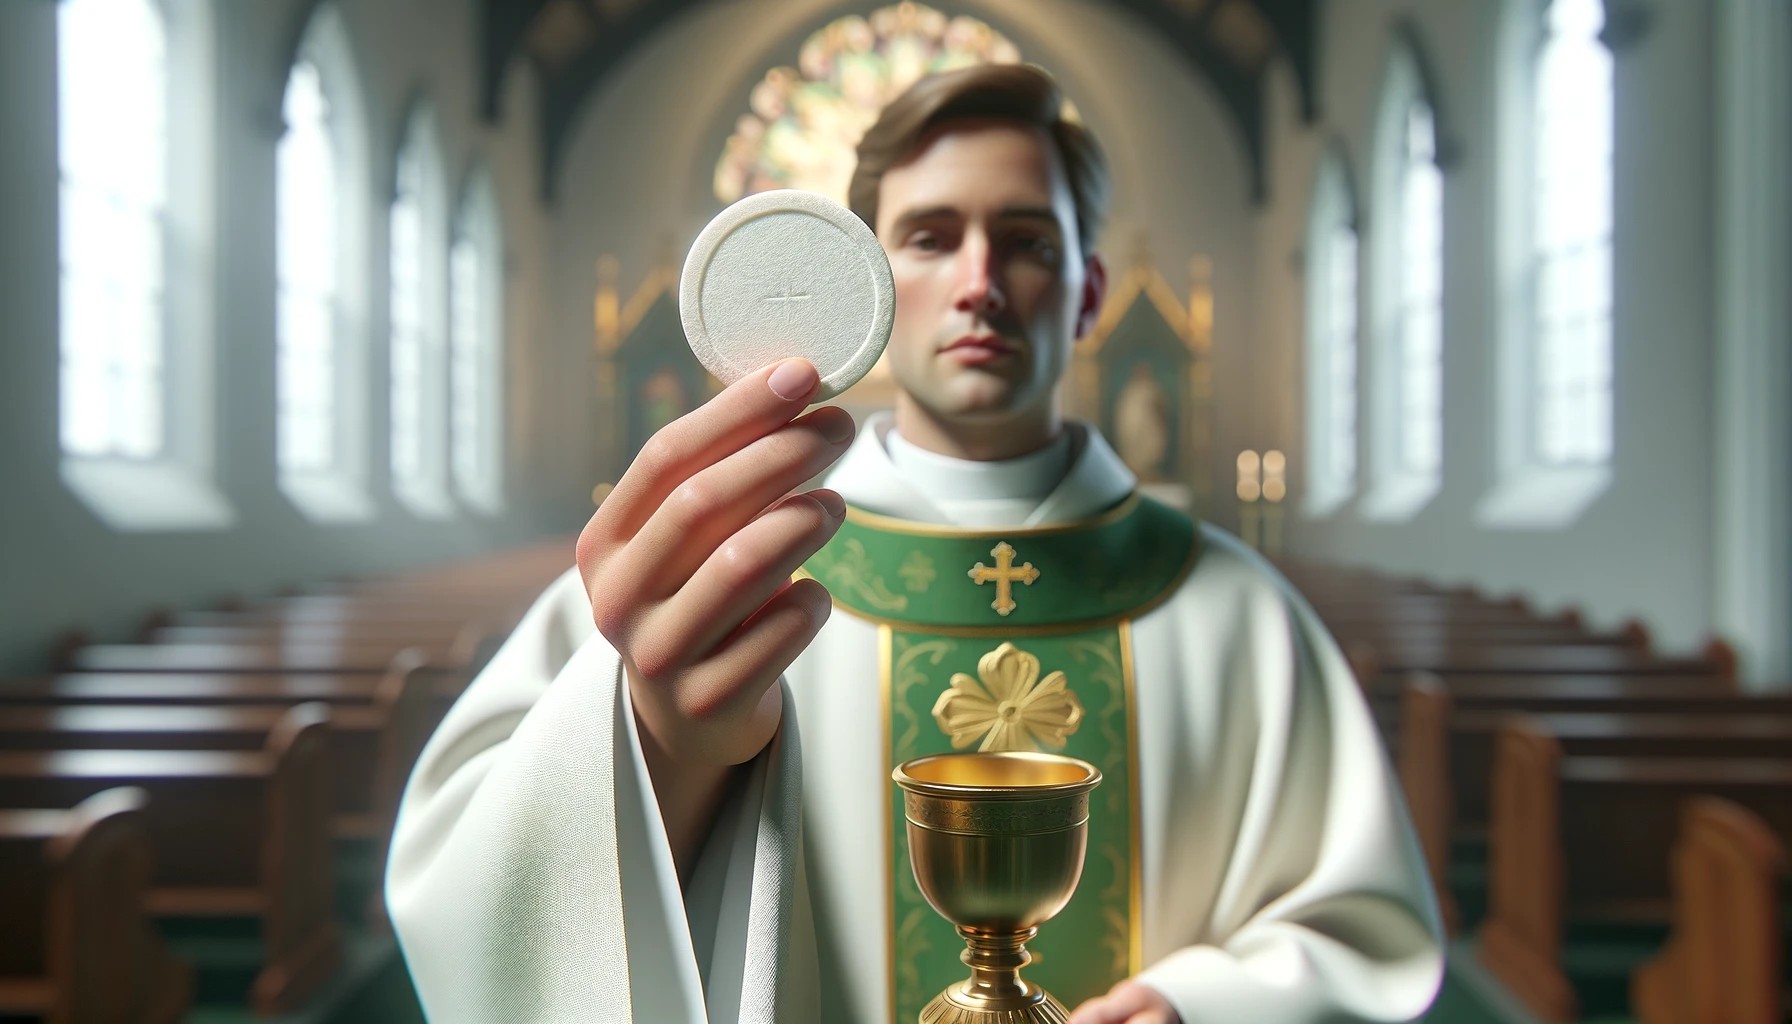 When Can You Take Communion In The Catholic Church